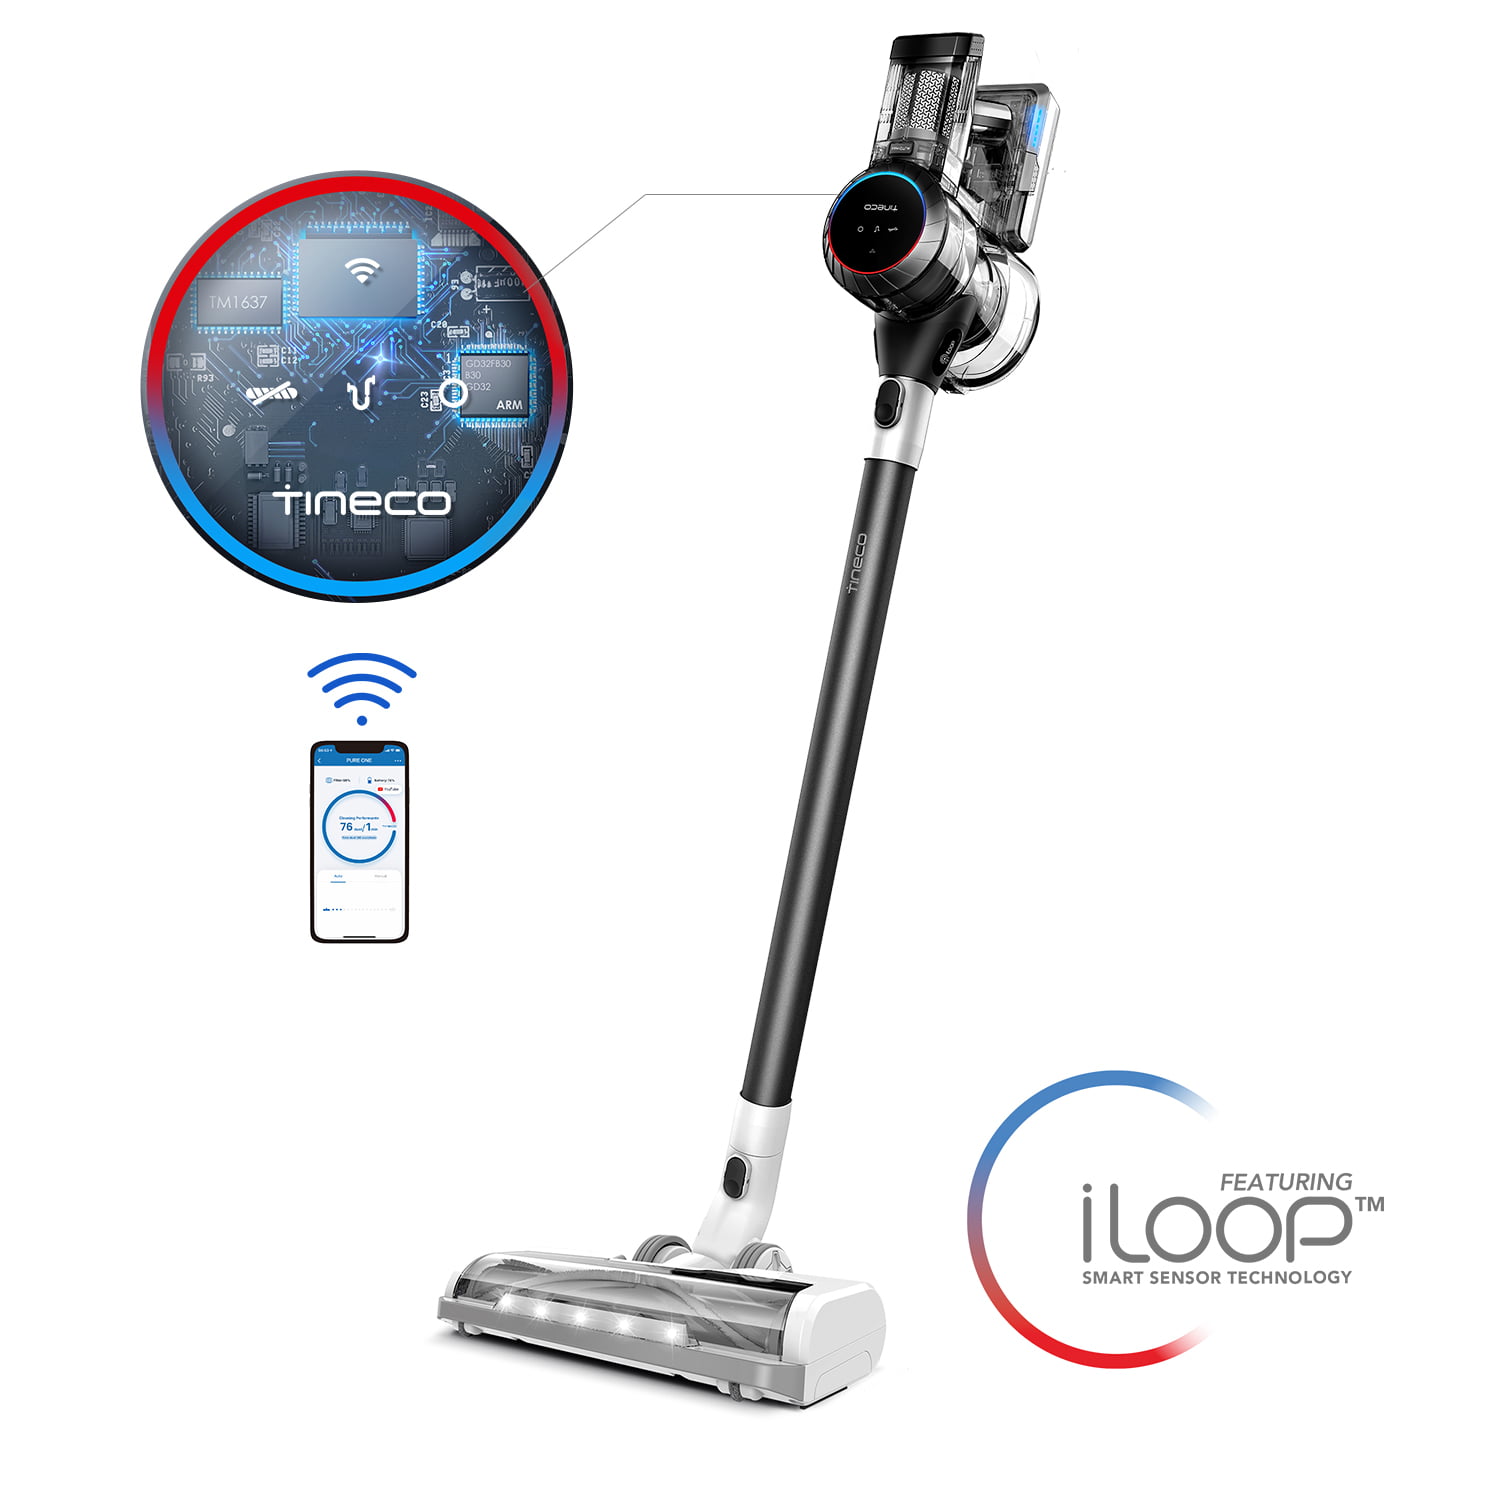 Tineco Pure One S11 Spartan Cordless Smart Stick Vacuum Cleaner for Hard Floors and Carpet $169 at Walmart